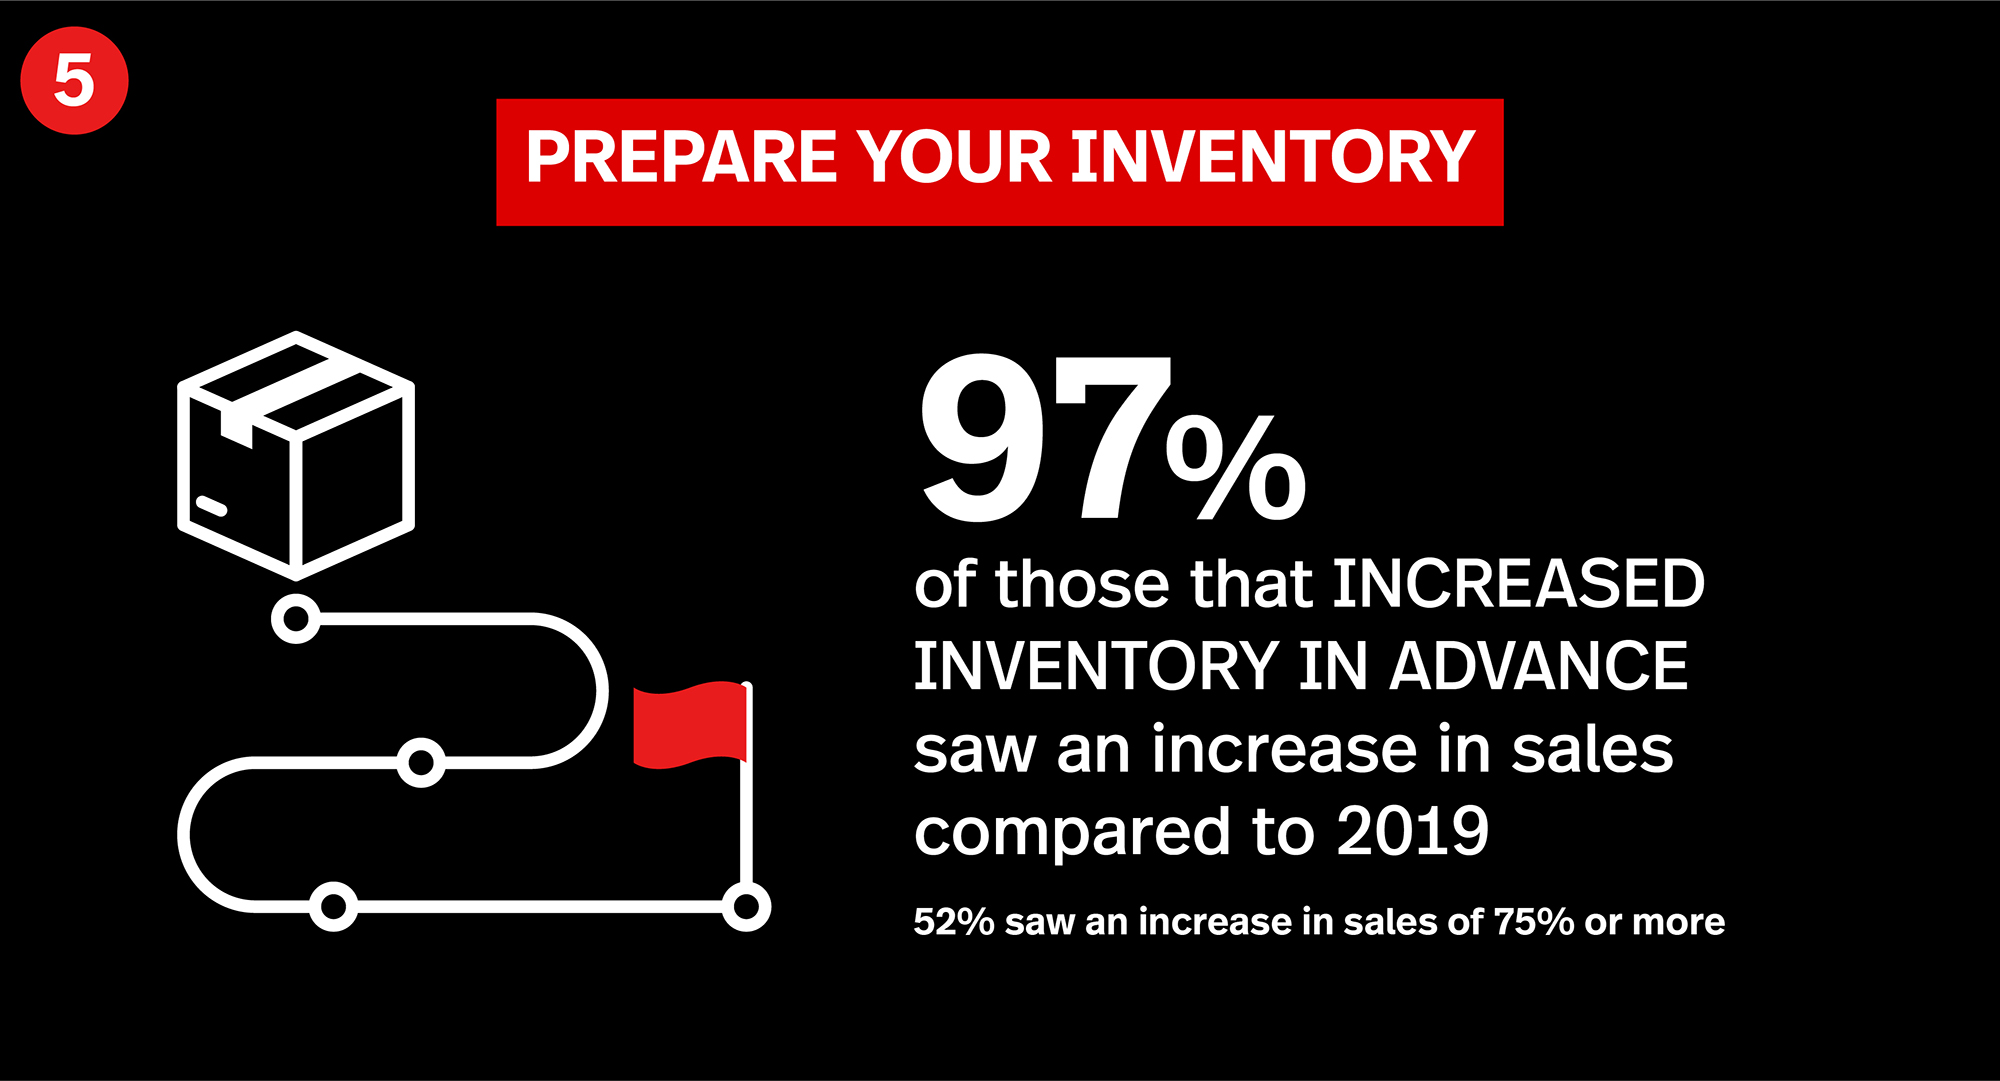 illustration for the importance of preparing inventory for holiday sales. 